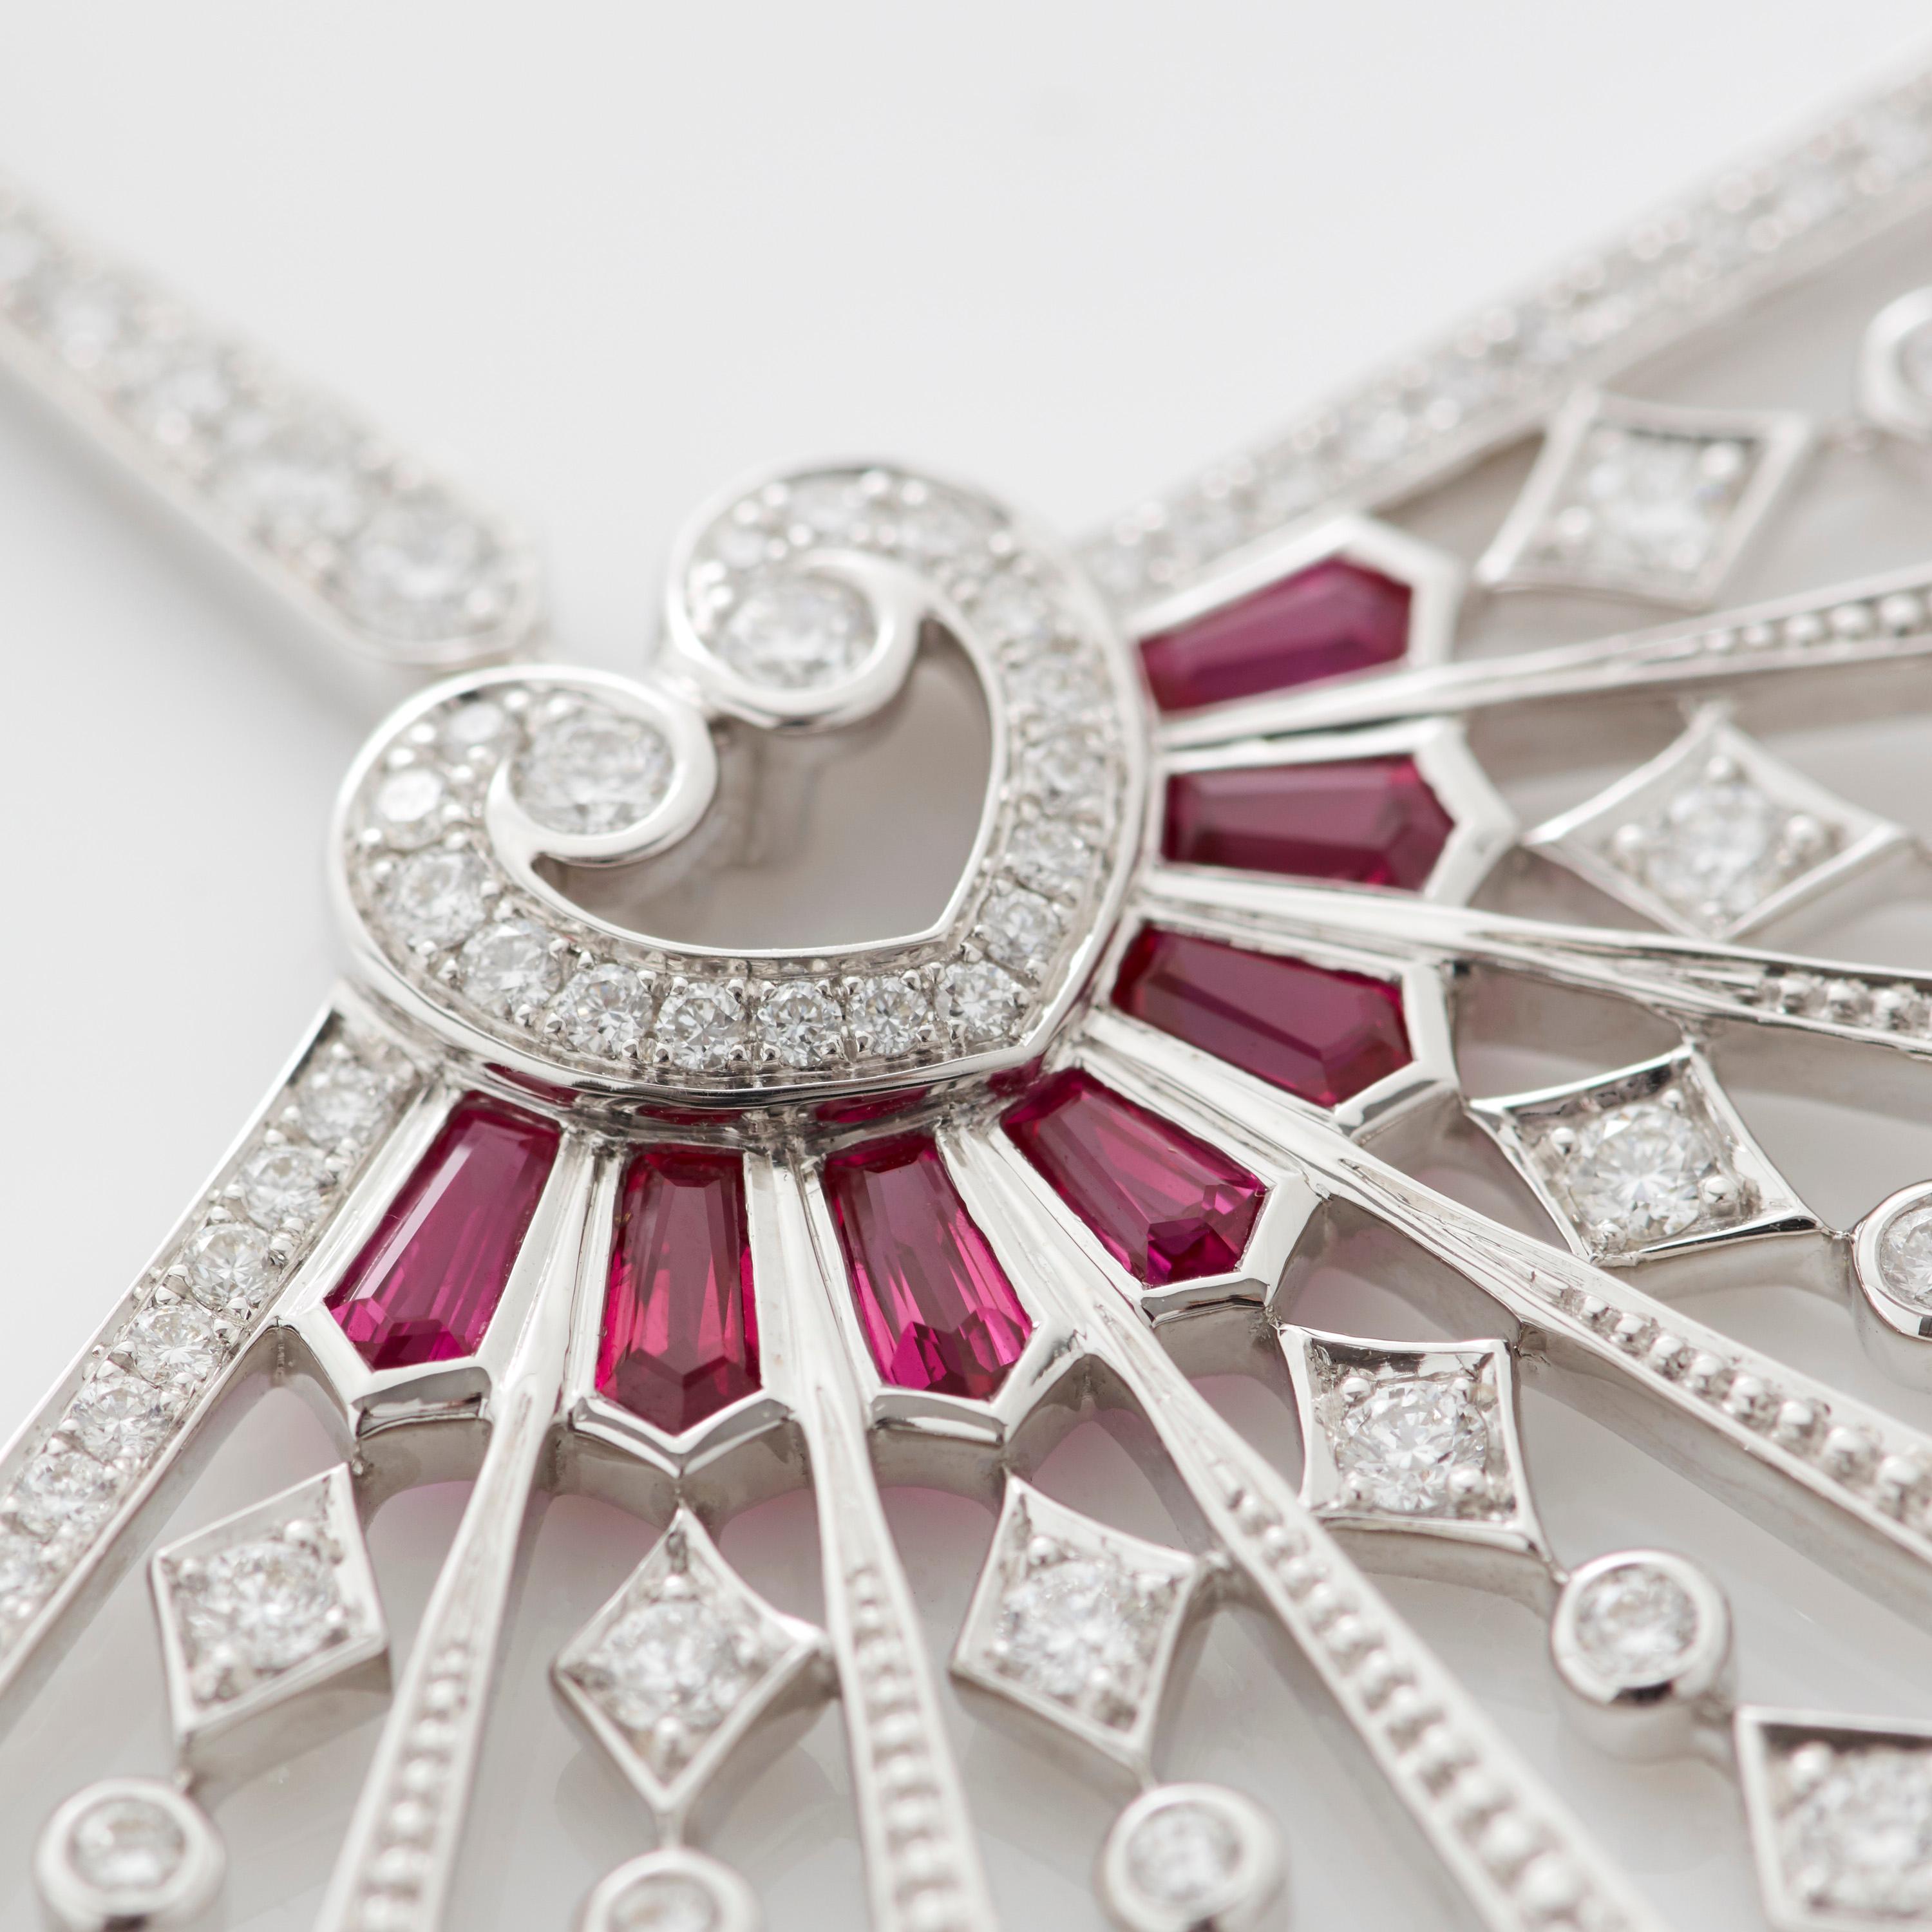 Women's or Men's Garrard 'Fanfare' White Gold Pendant with White Diamond and Calibre Cut Rubies For Sale